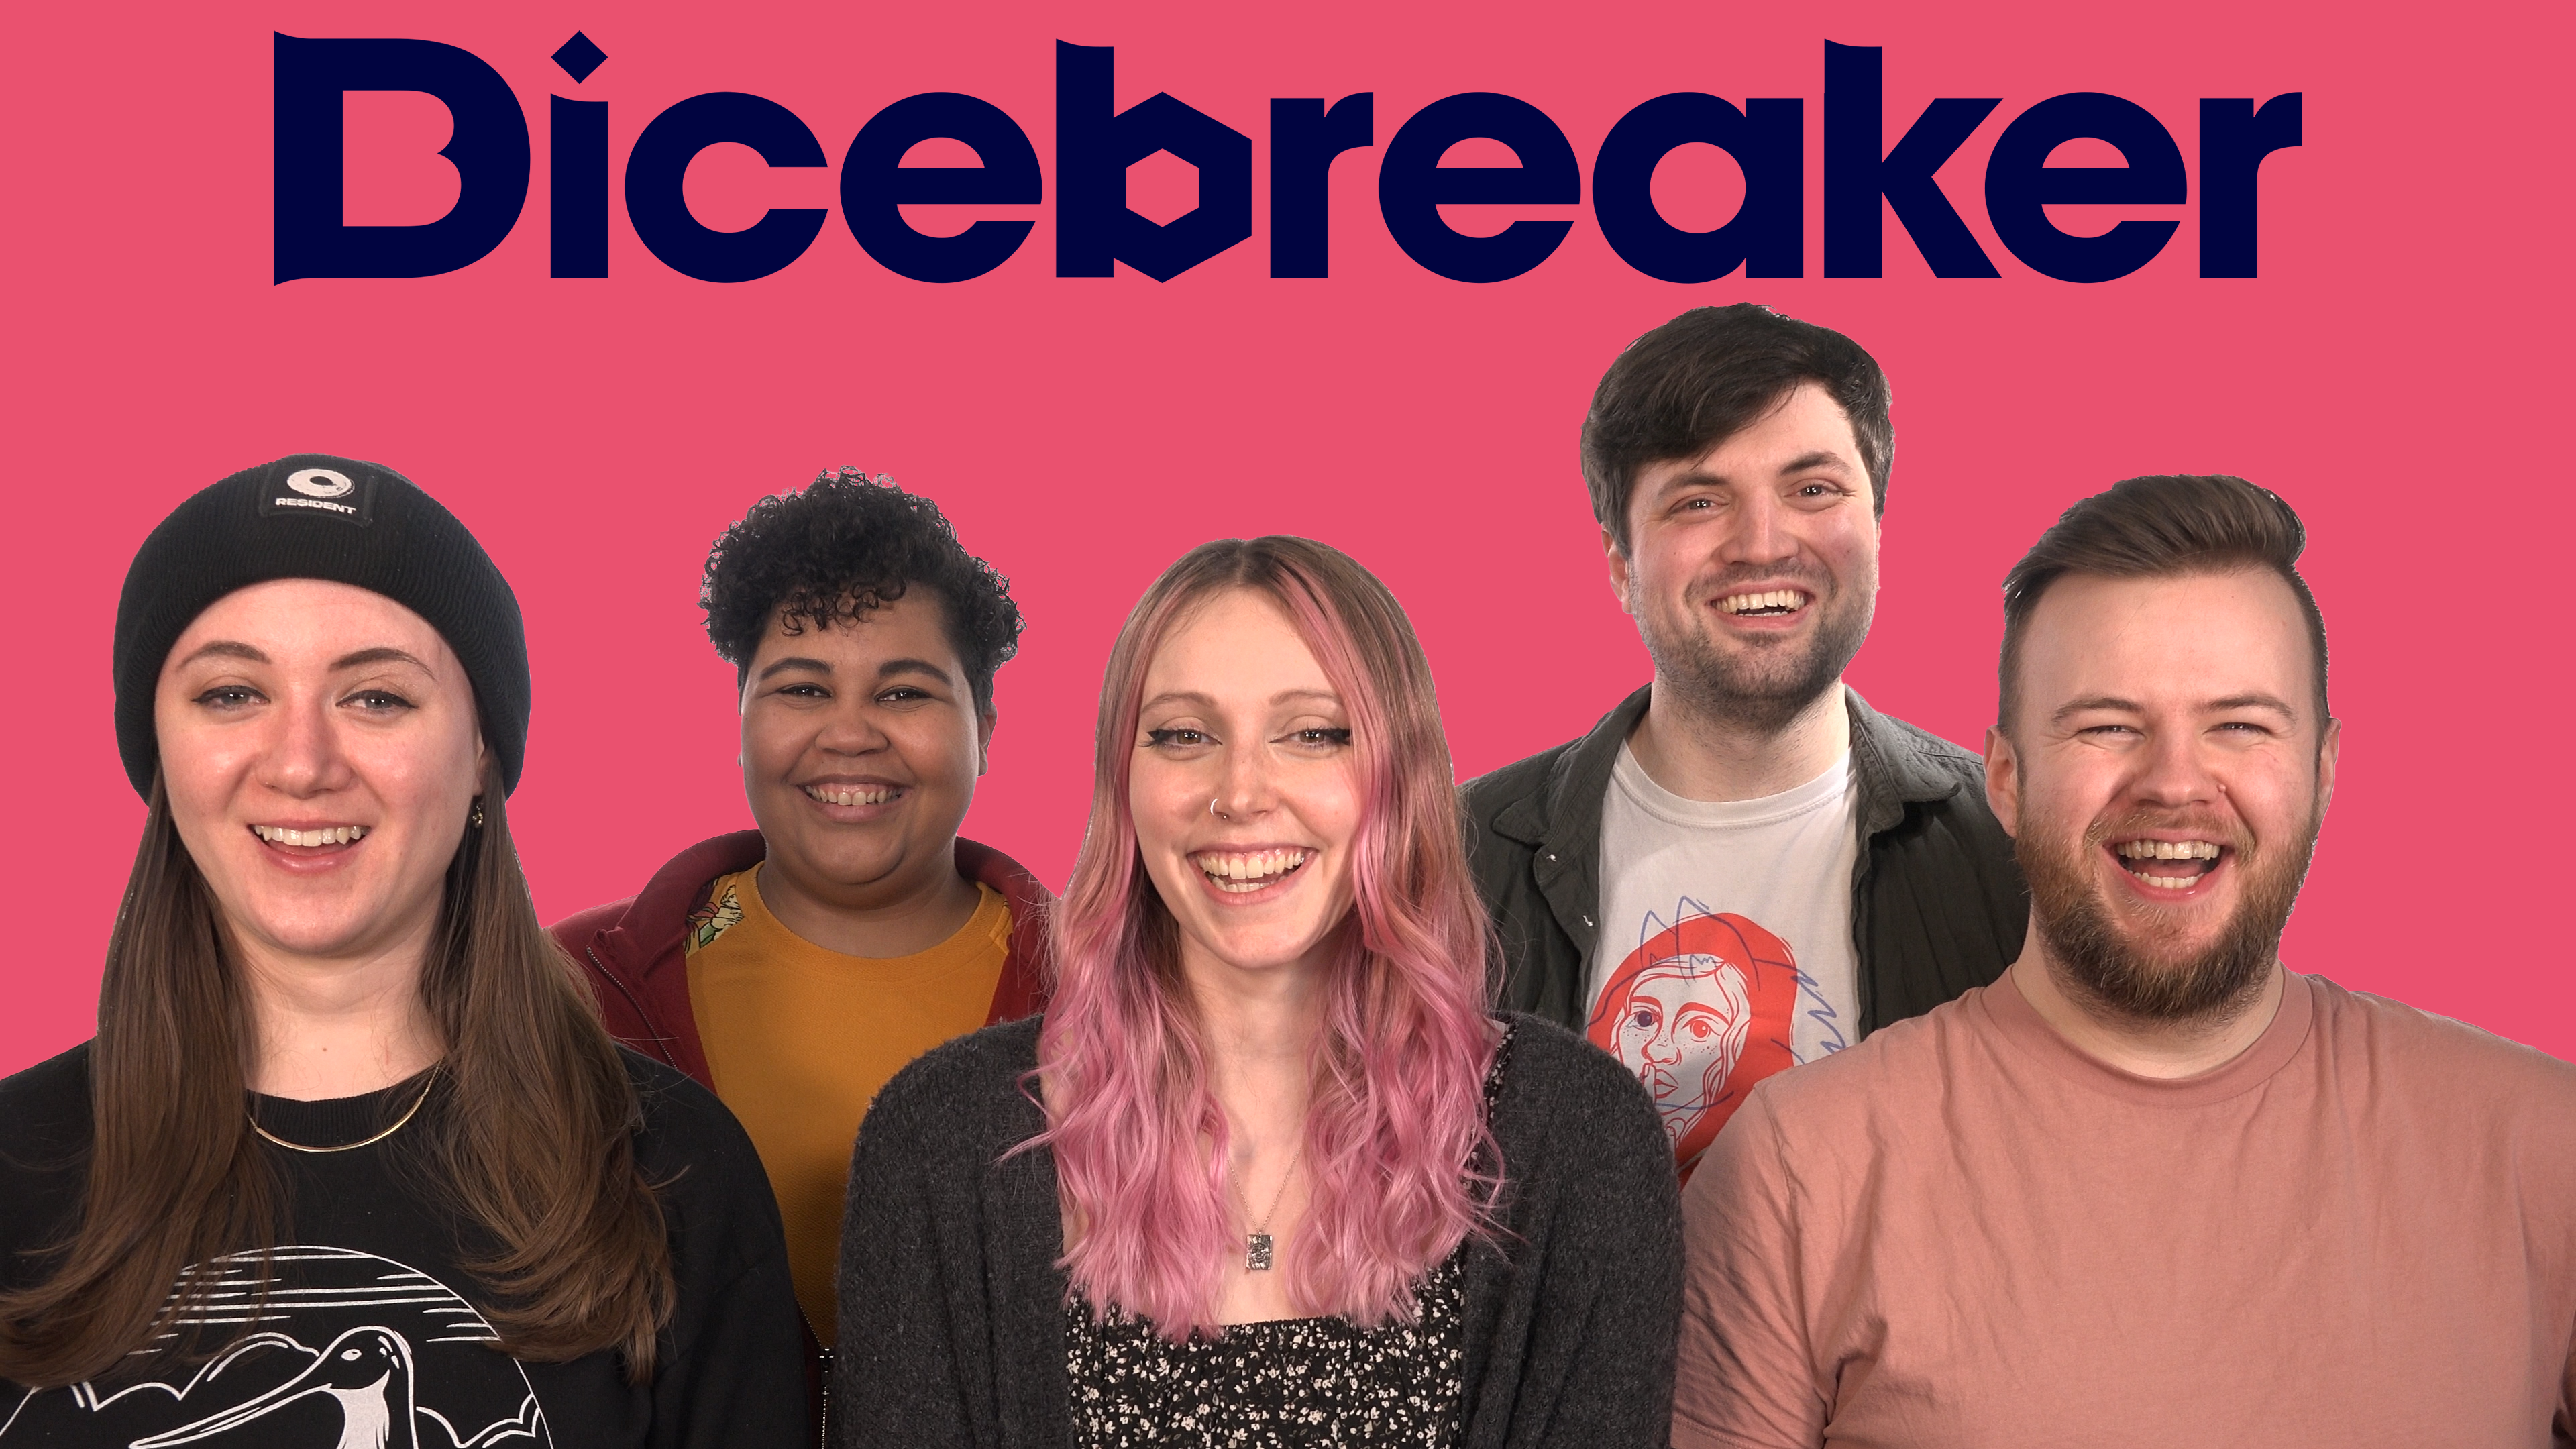 An image of the Dicebreaker team